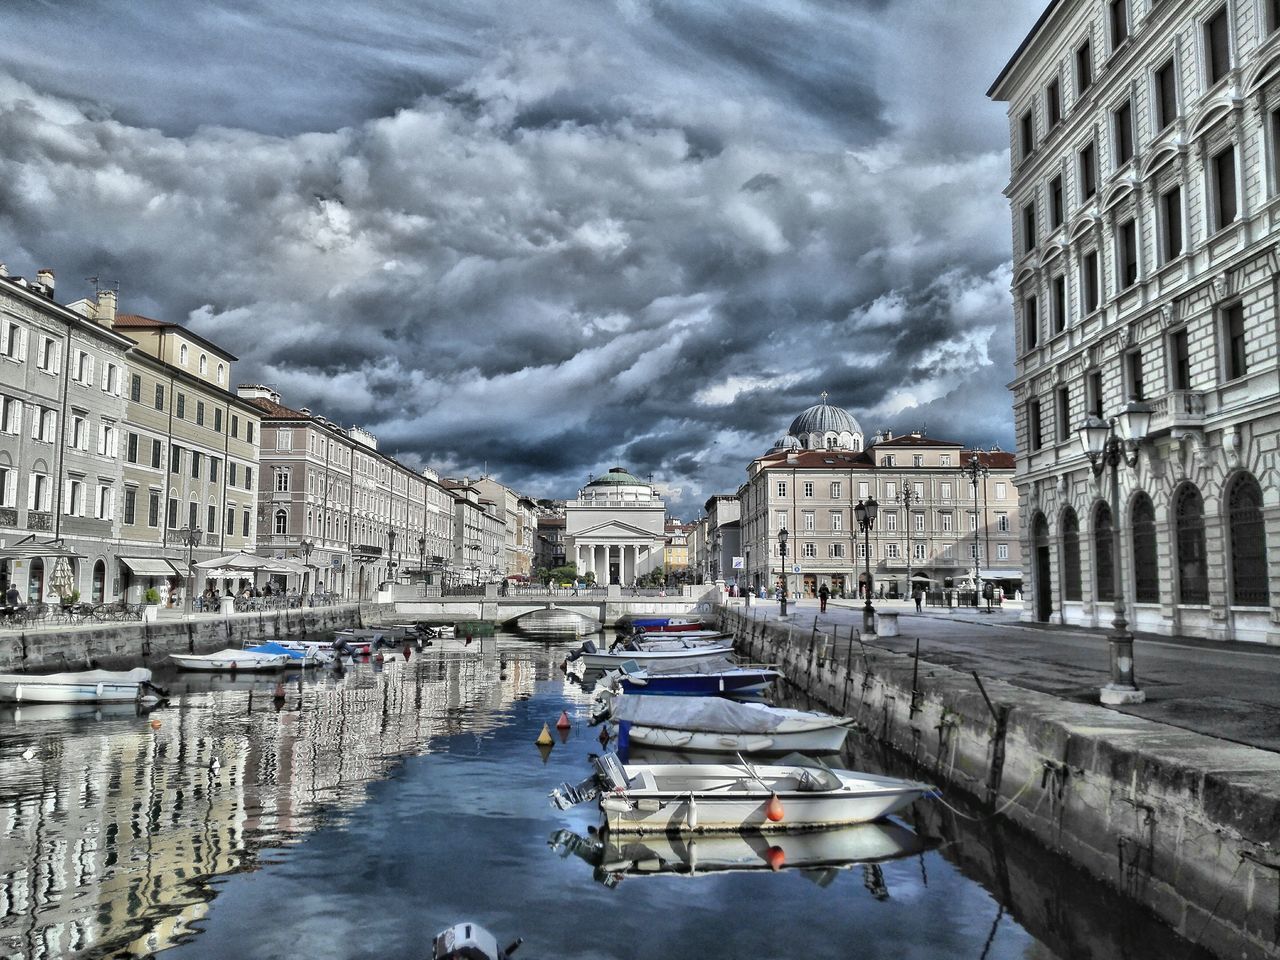 building exterior, architecture, built structure, city, water, transportation, sky, cloud, canal, city life, cloud - sky, mode of transport, cloudscape, waterfront, day, cloudy, in a row, outdoors, residential district, old town